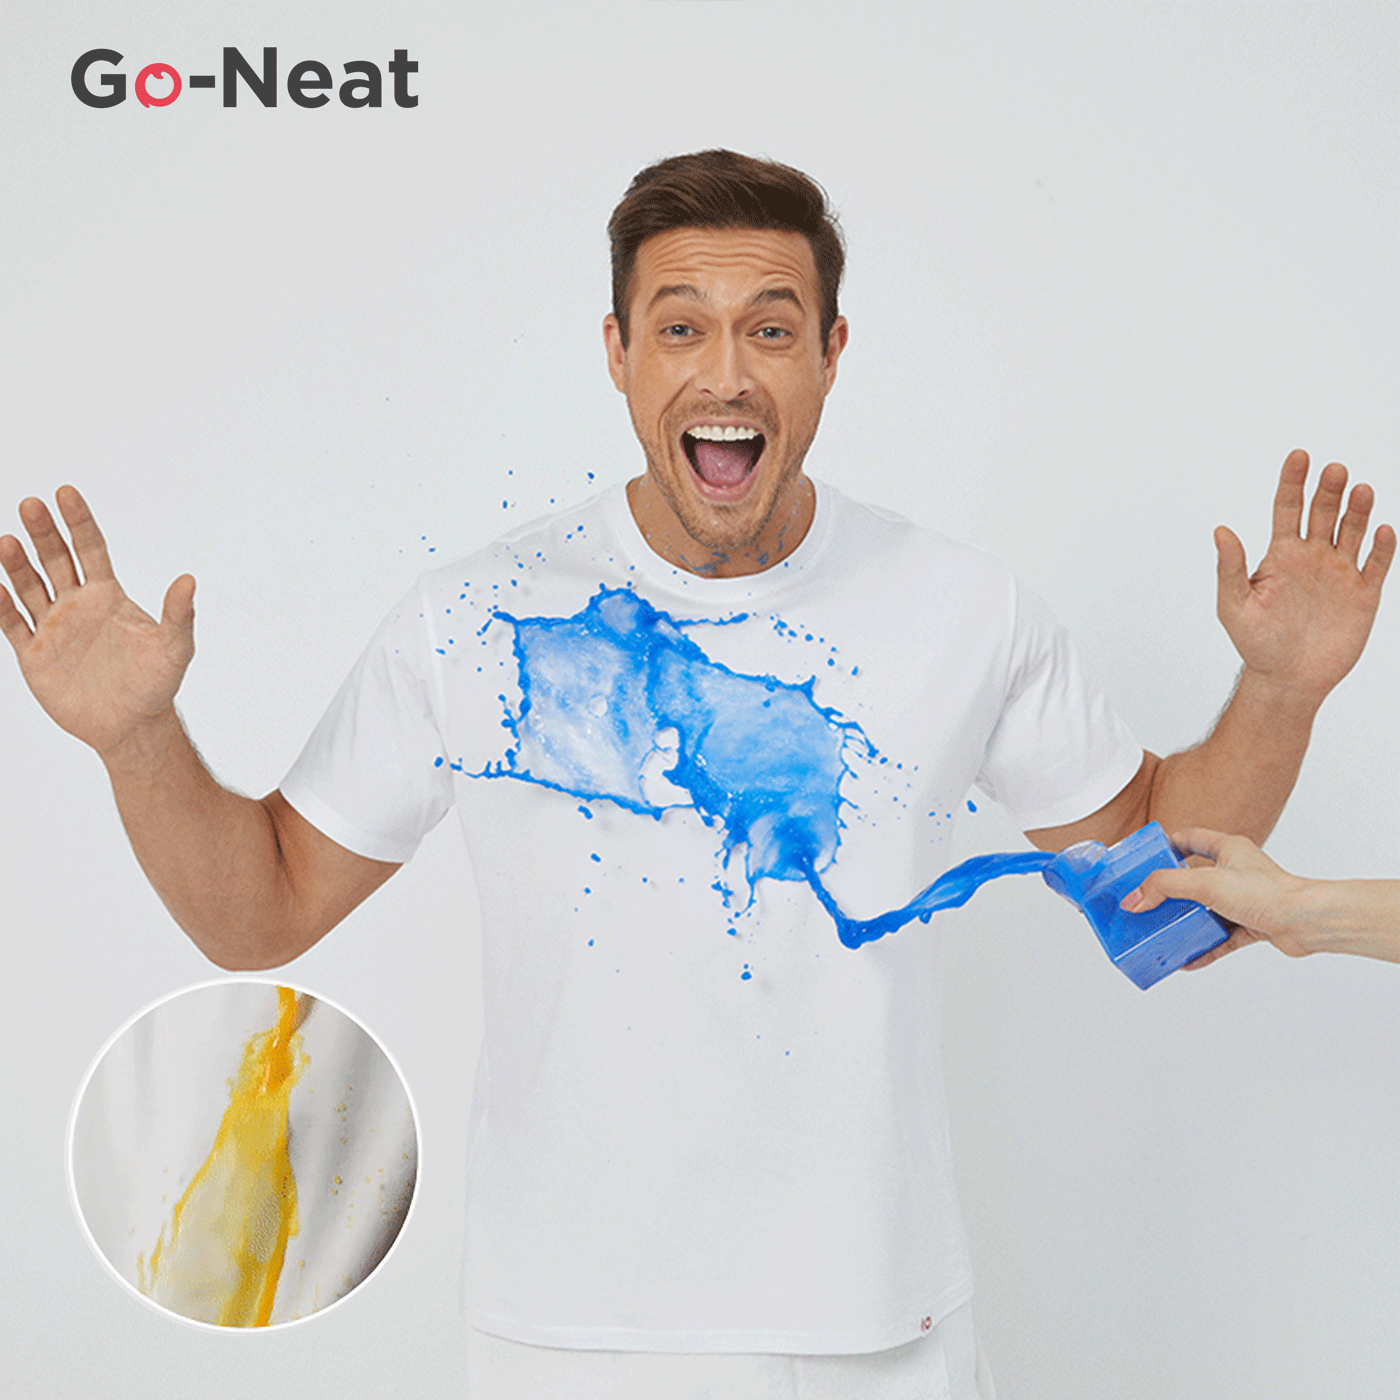 Go-Neat Water Repellent And Stain Resistant T-Shirts For Men